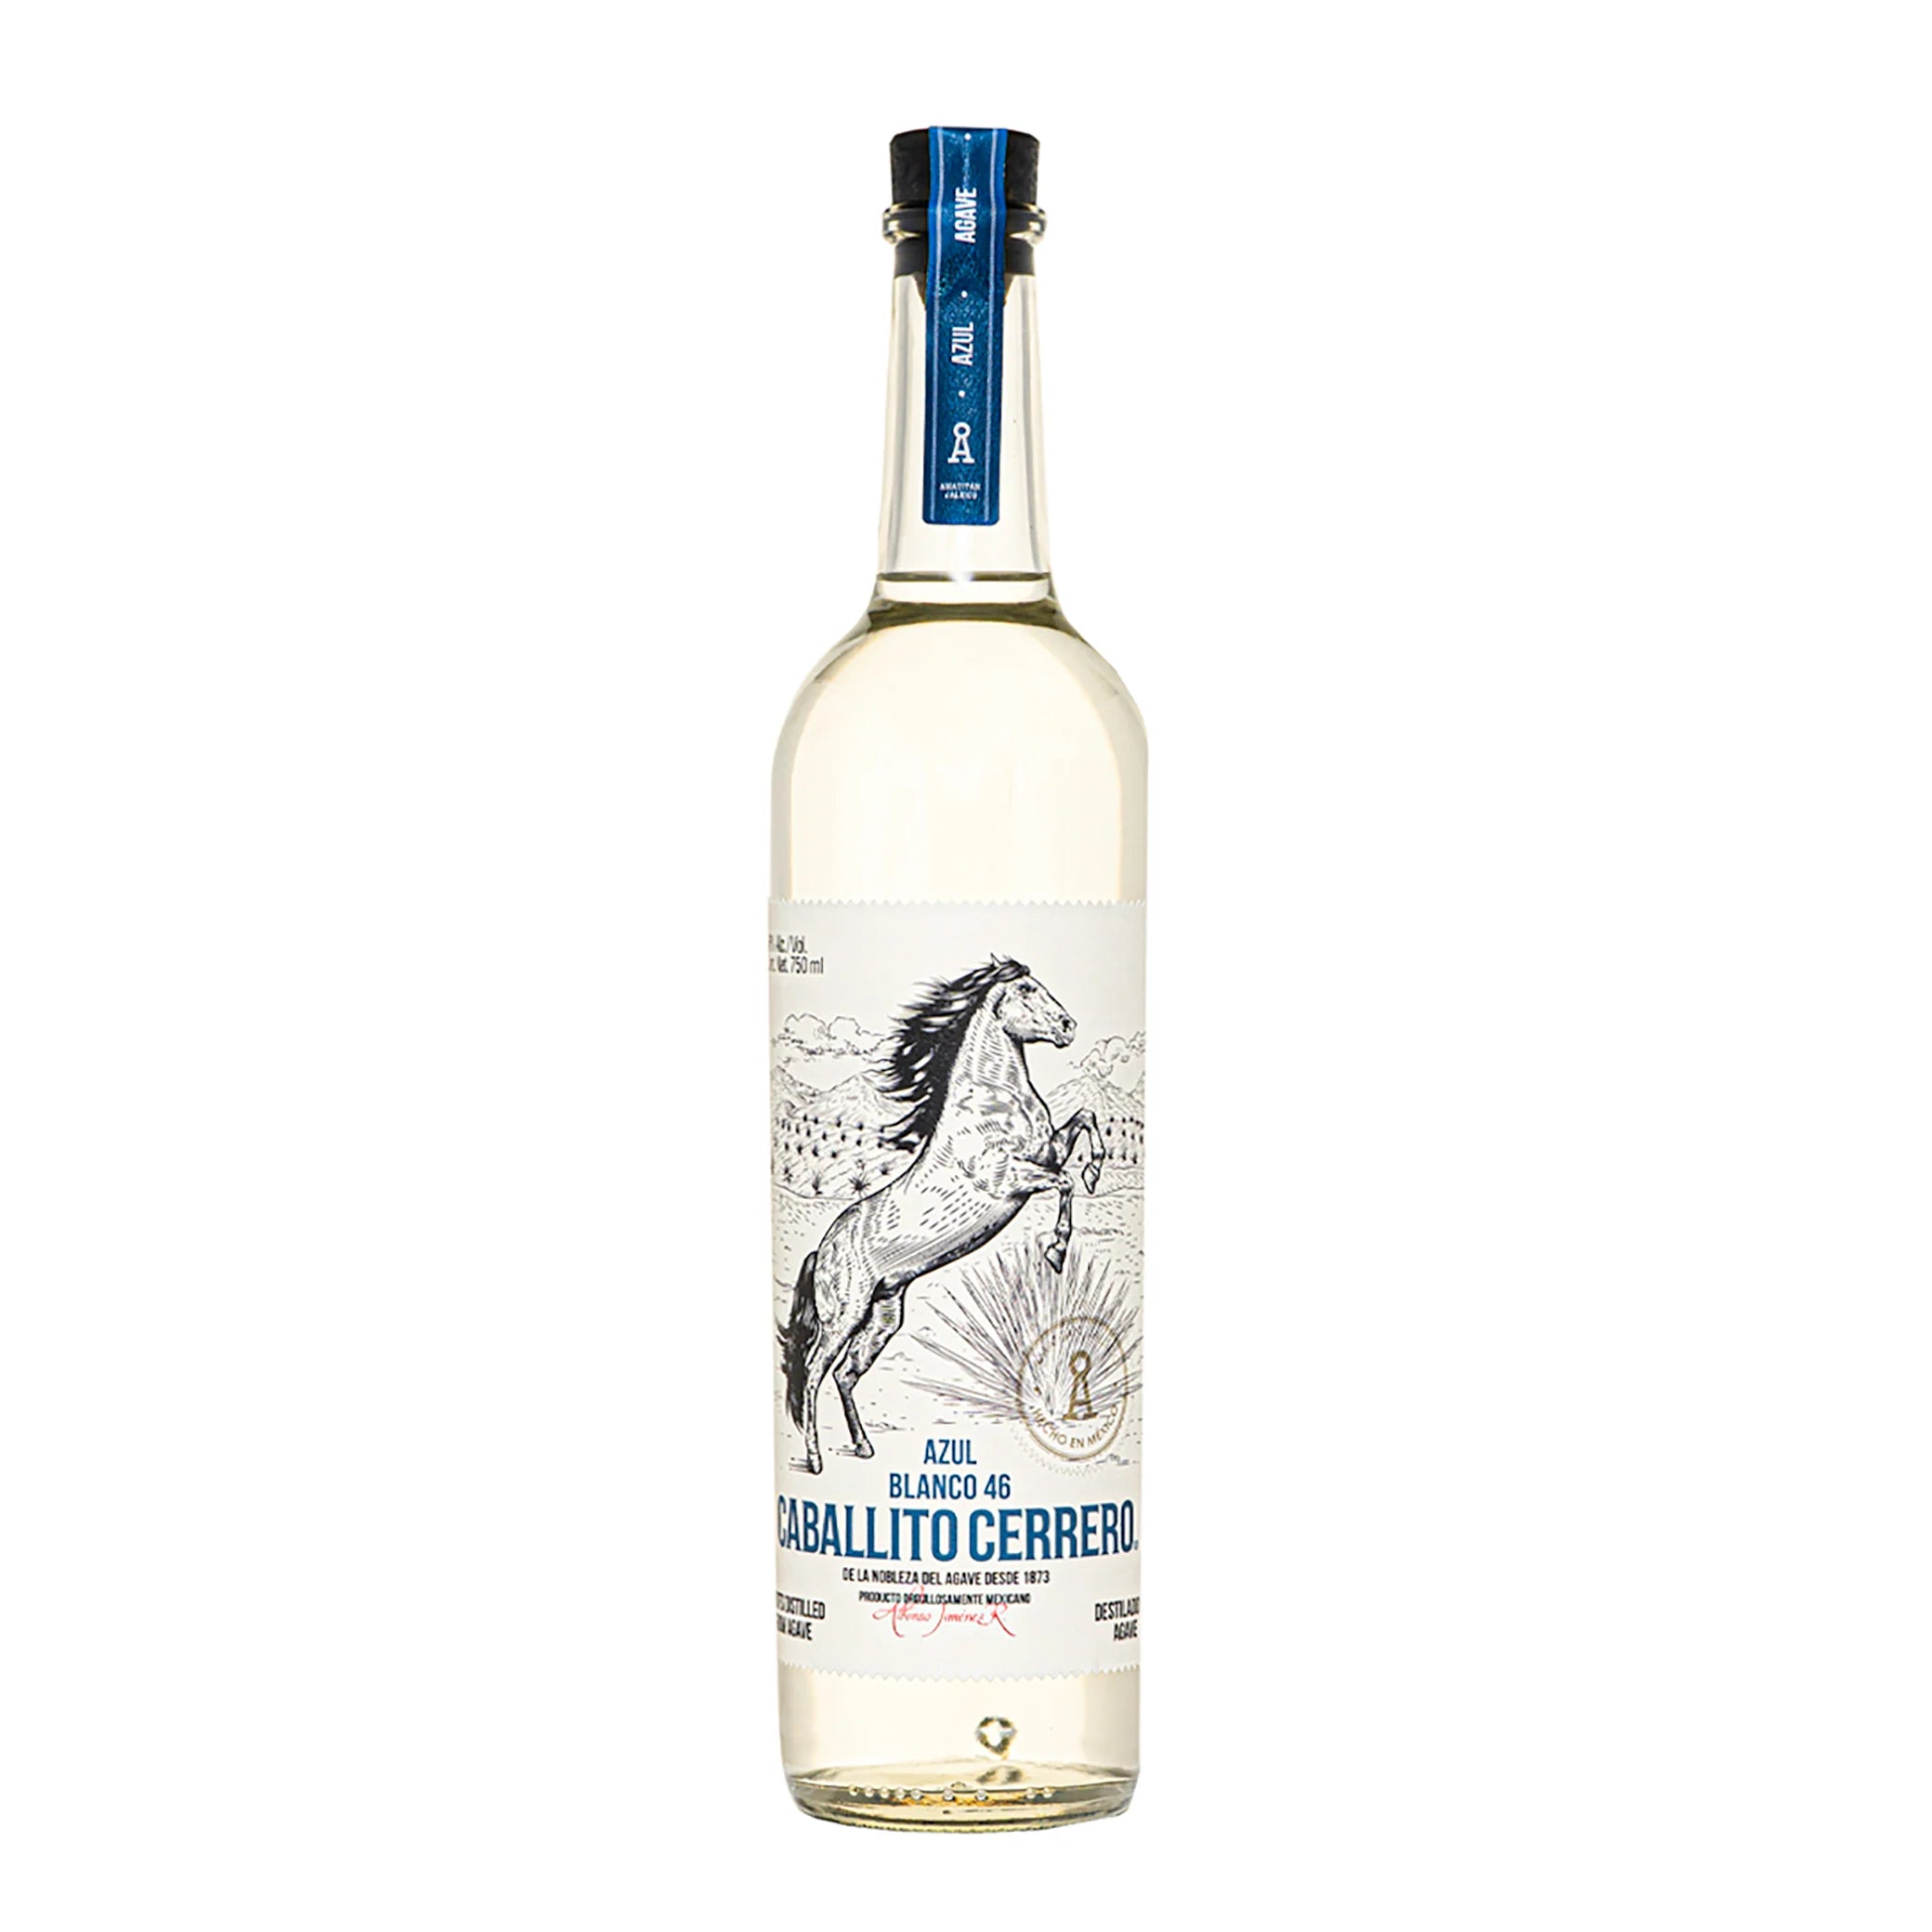 Caballito Cerrero Blanco Agave Azul 46 750mL a tall slender clear glass bottle with a white label of a prancing horse on it and a black top with a blue necker